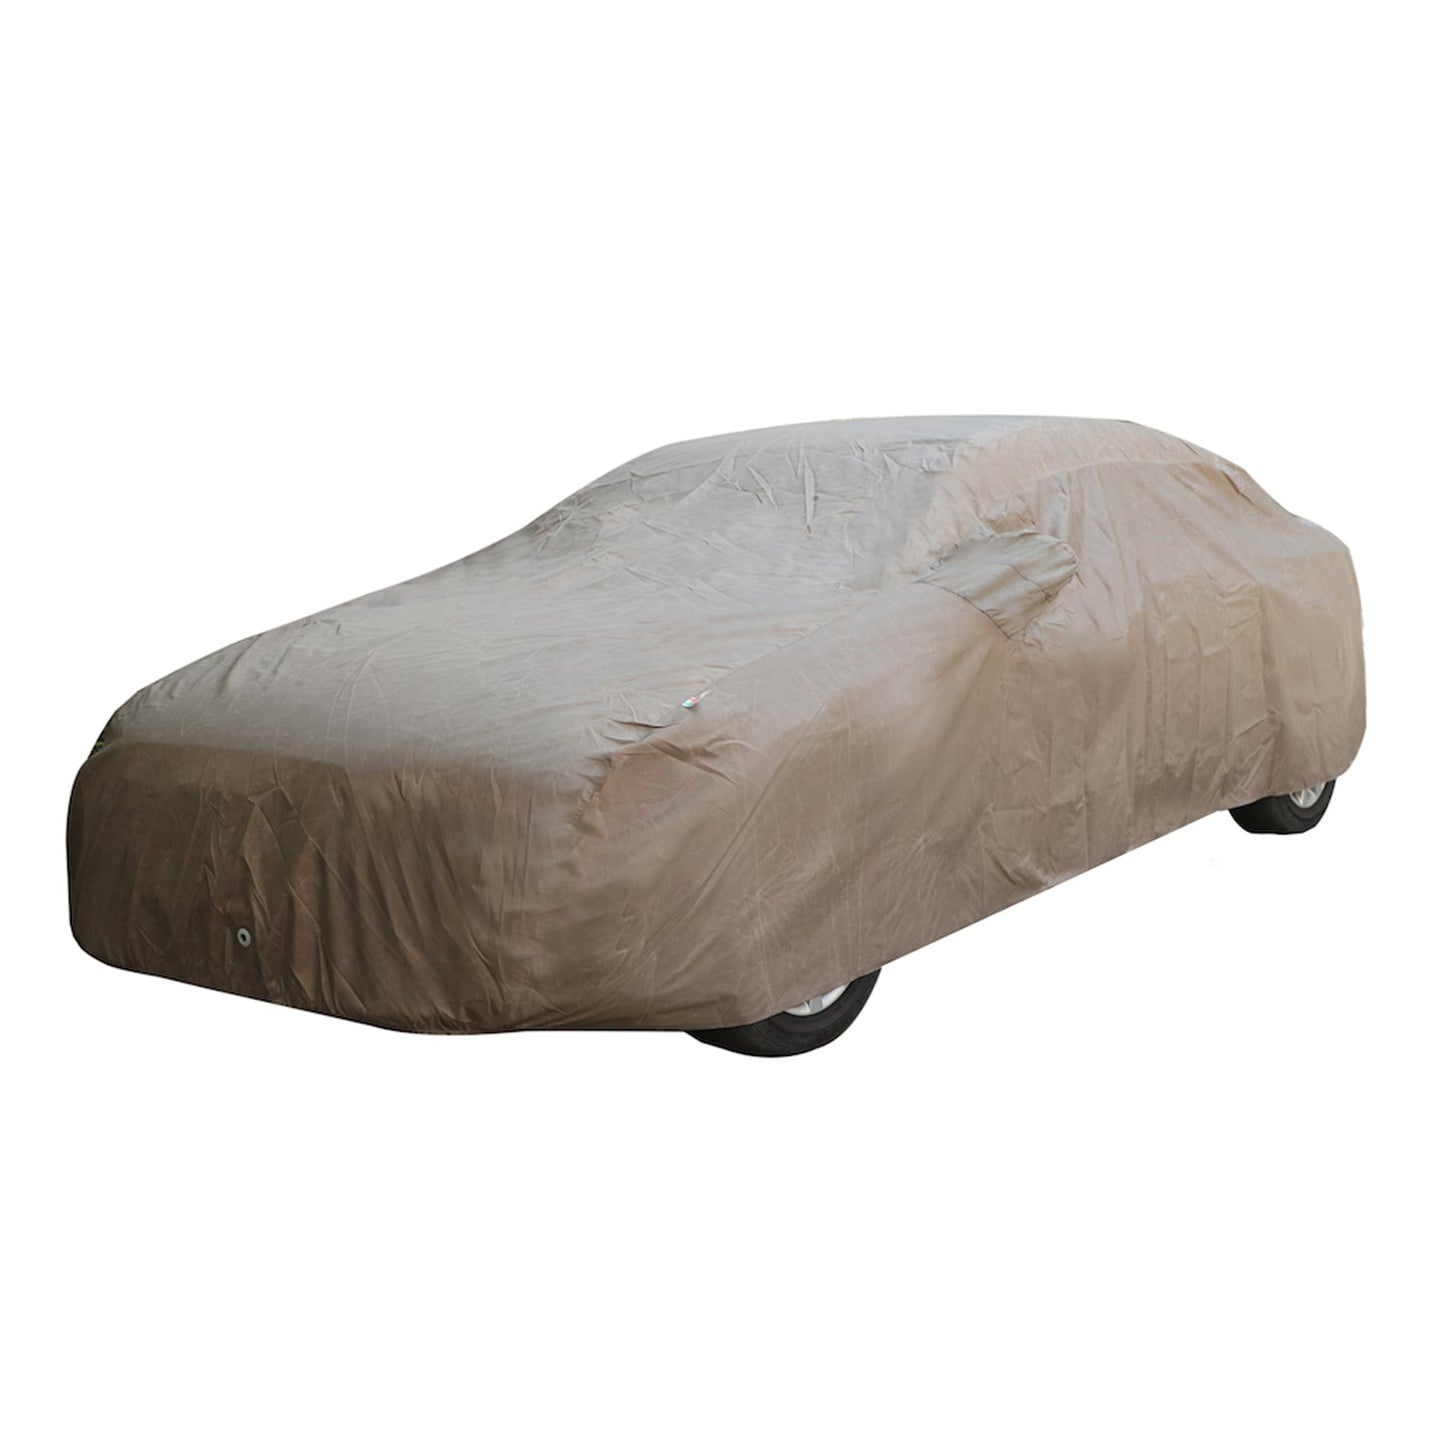 Oshotto Brown 100% Waterproof Car Body Cover with Mirror Pockets For Toyota Corolla Altis